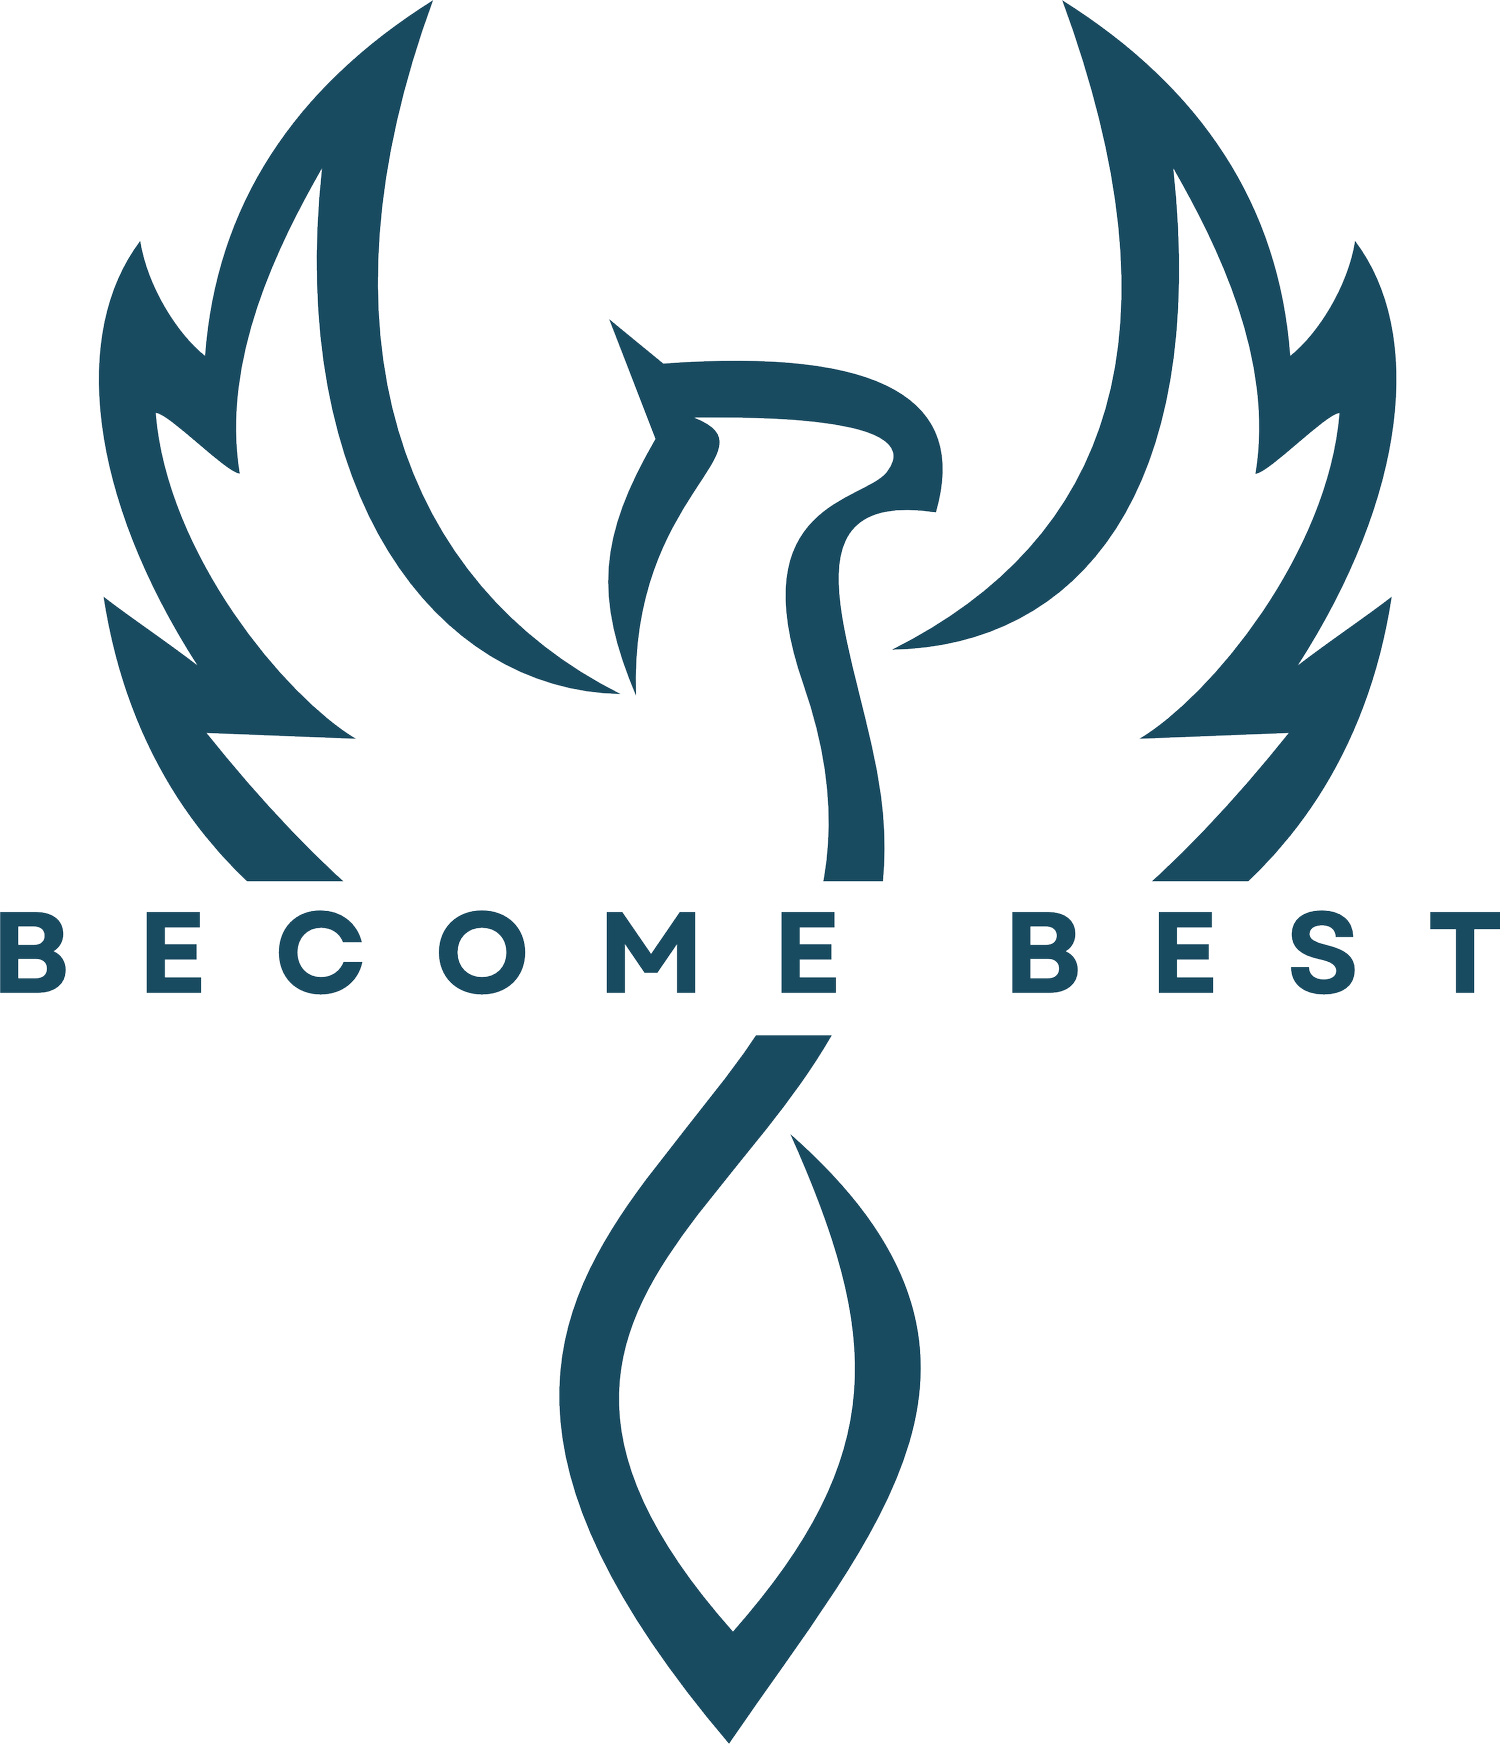 Become BEST Home